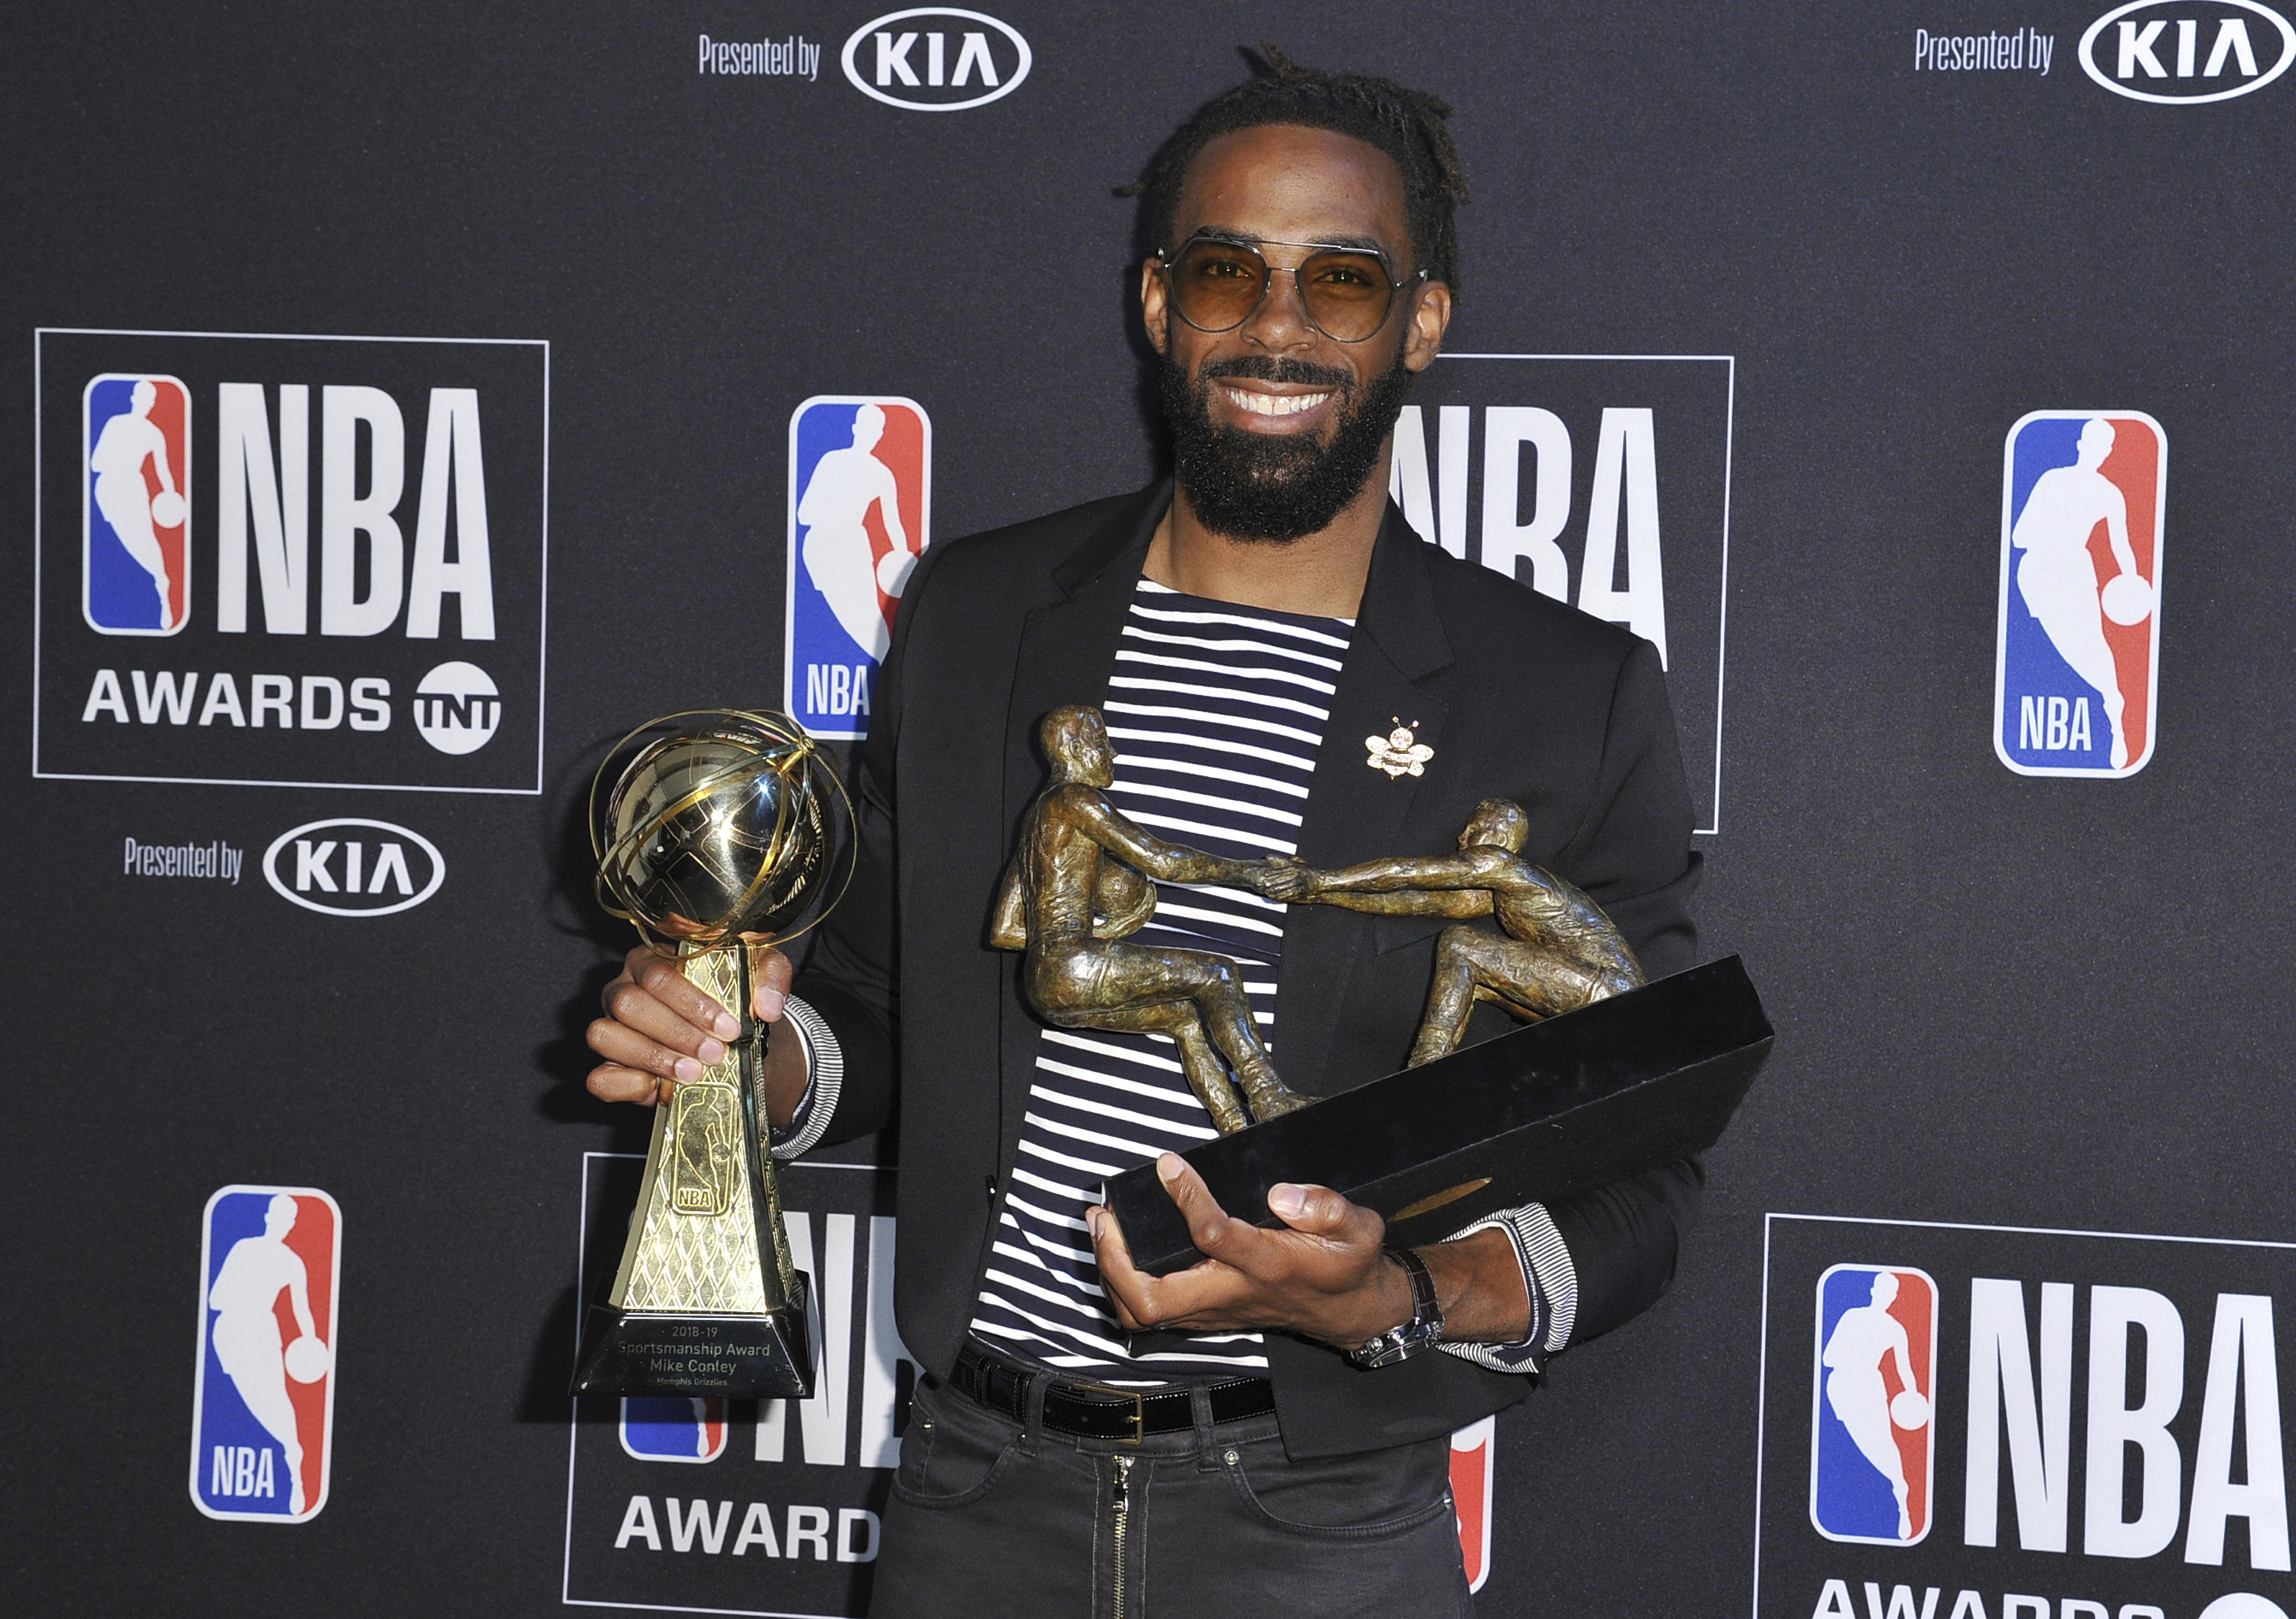 Mike Conley wins Teammate and Sportsmanship of the Year at NBA Awards